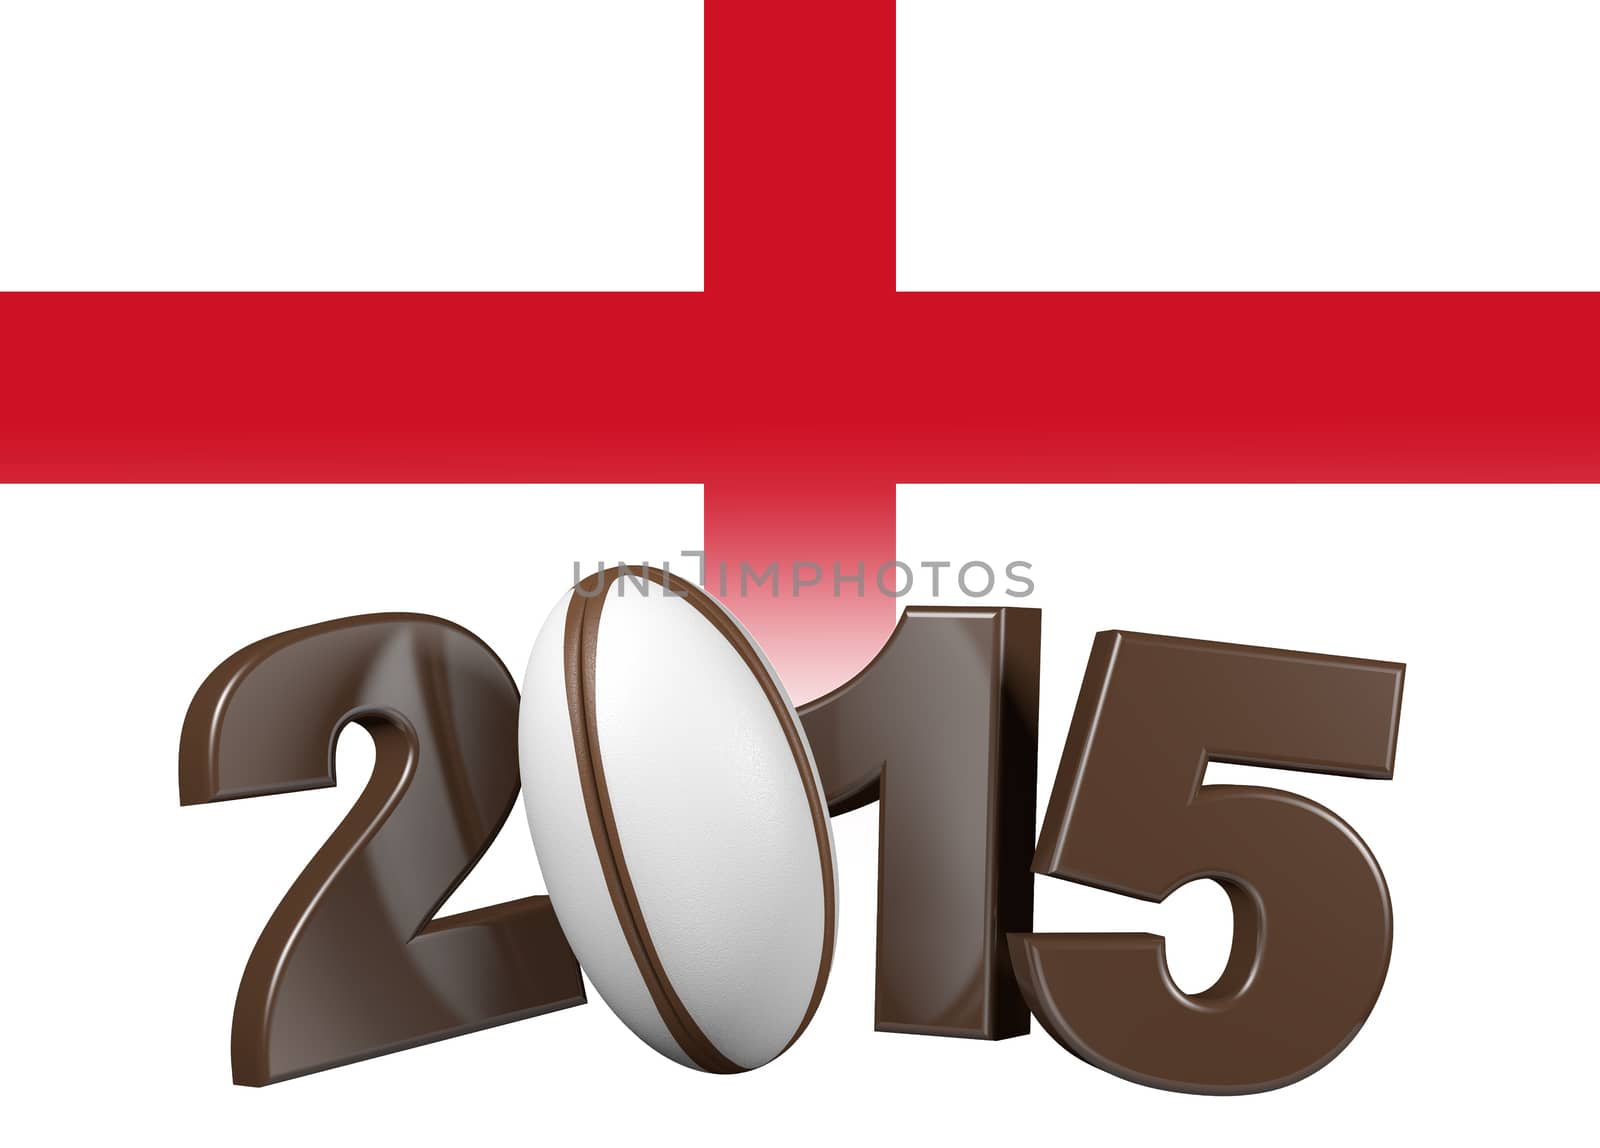 Rugby 2015 design with England Flag by shkyo30